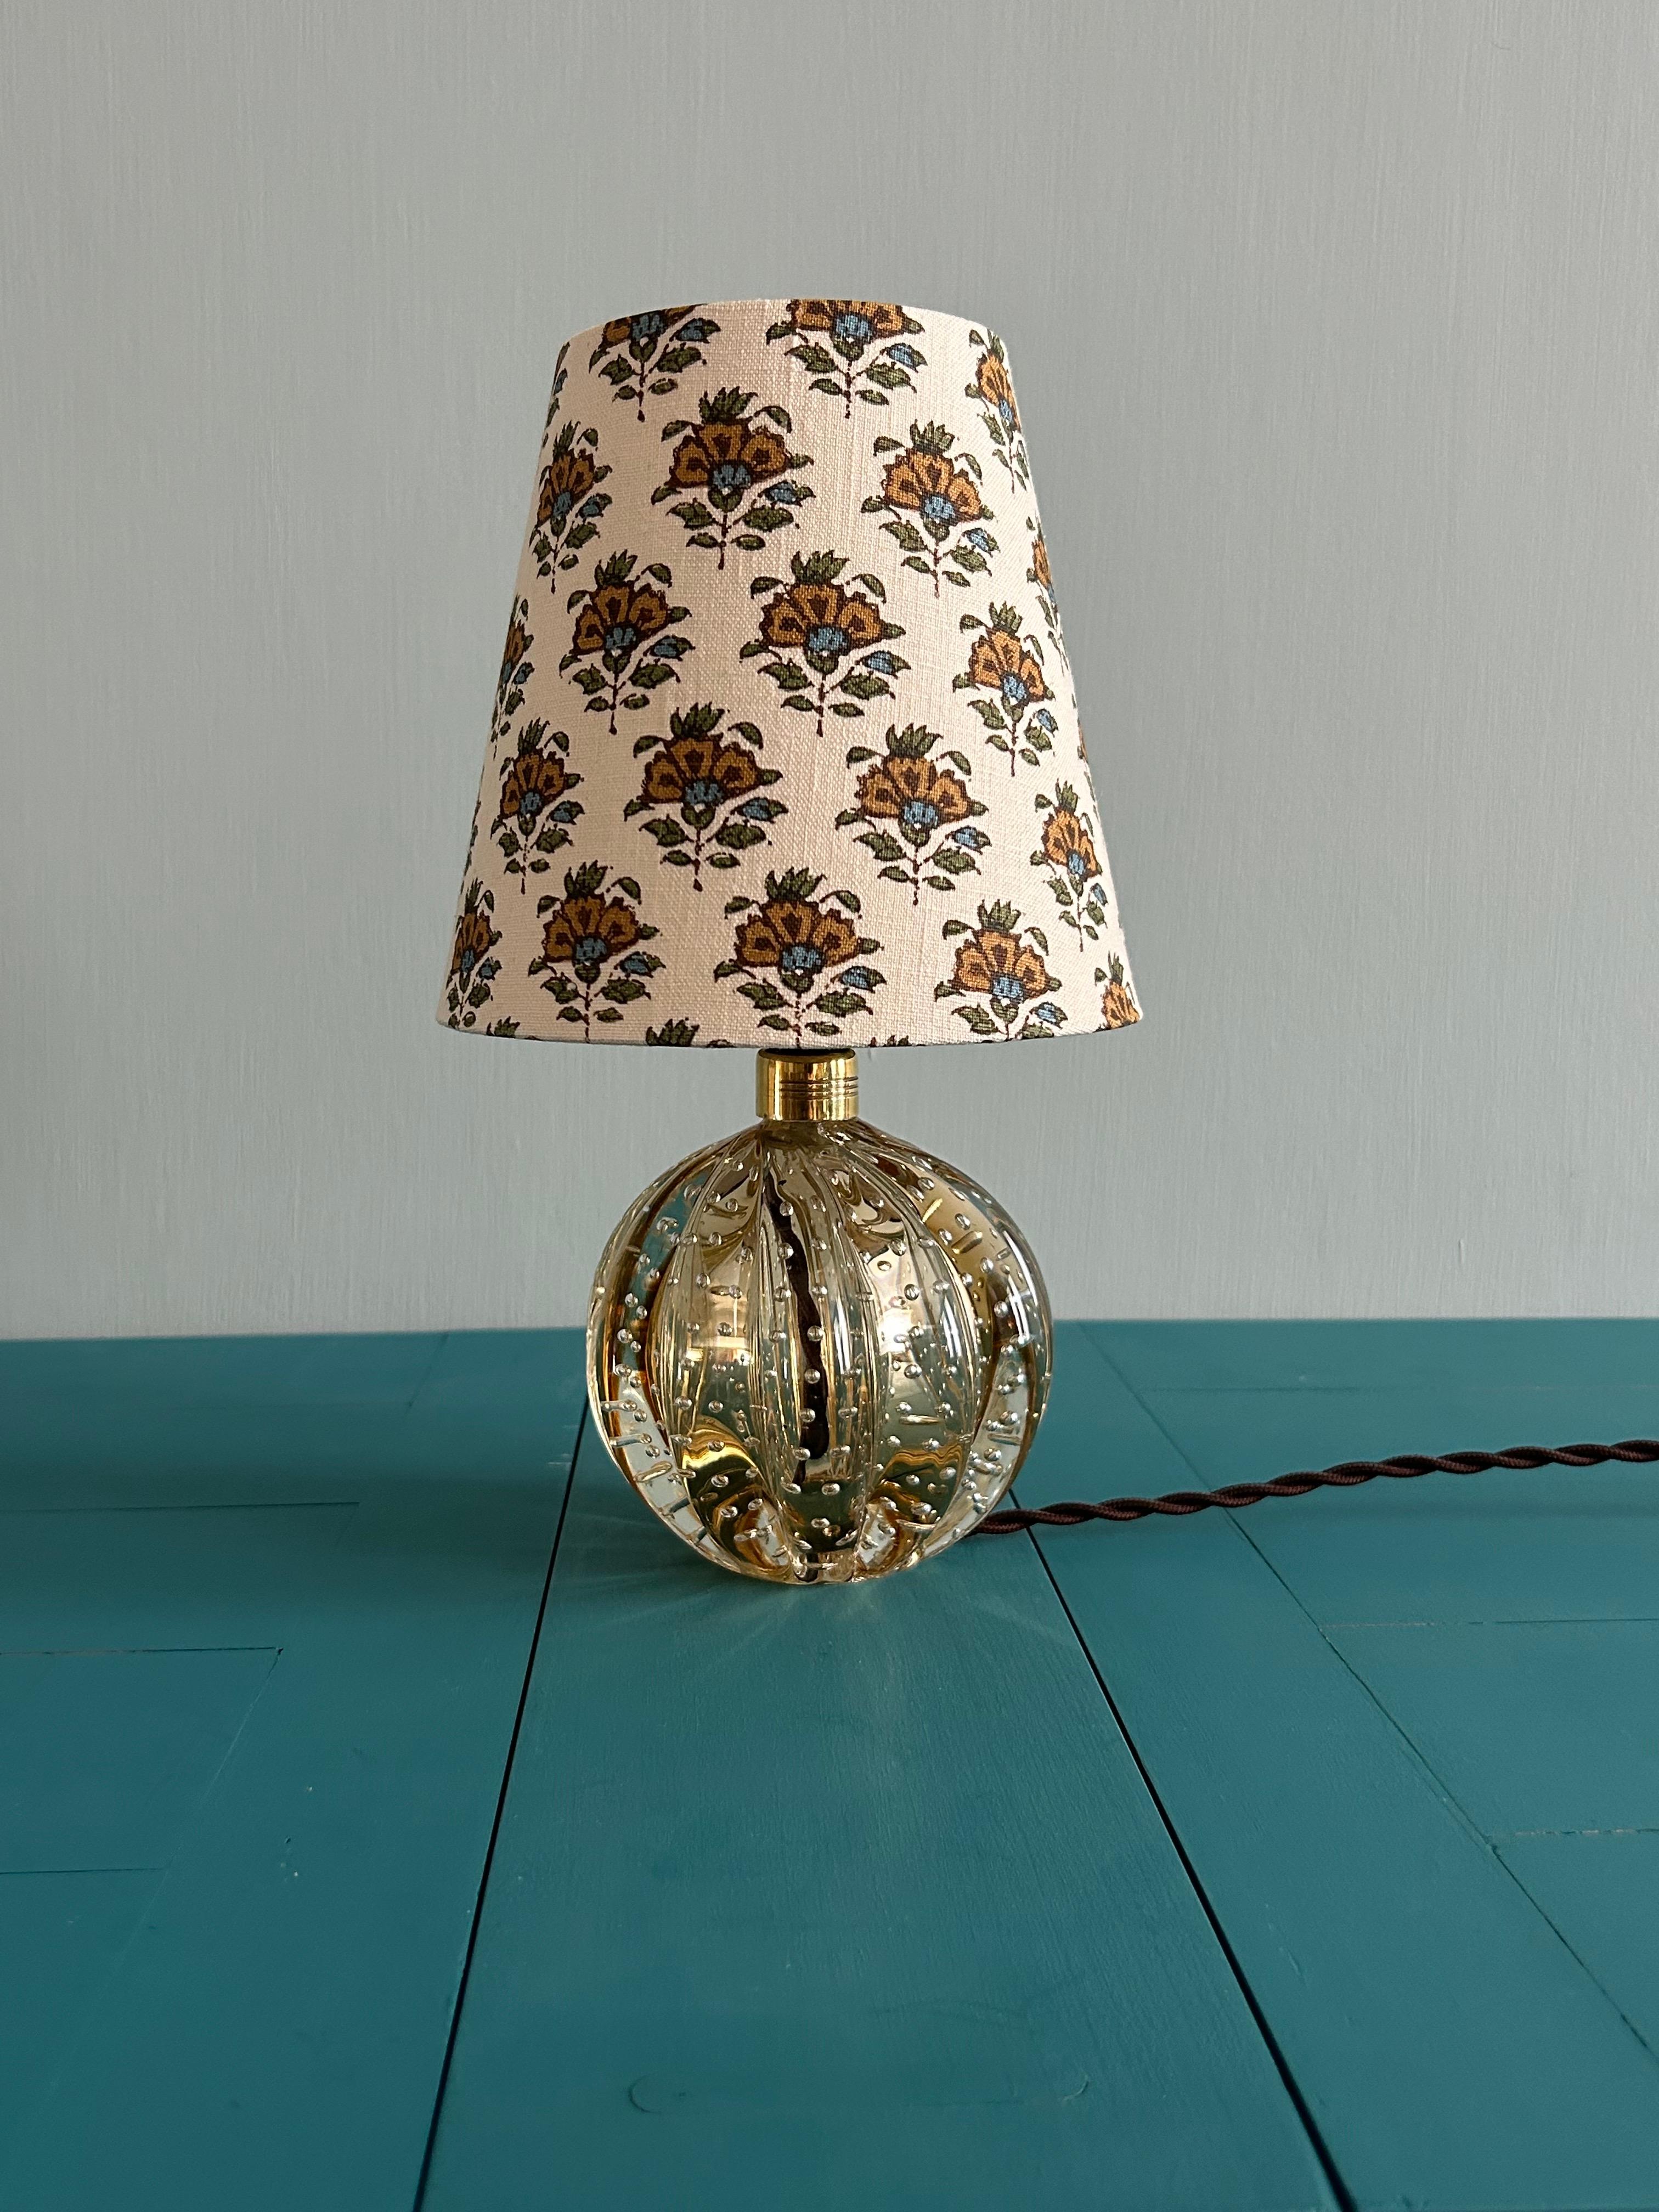 Textile Vintage Champagne Coloured Murano Table Lamp with Customized Shade, Italy, 1950s For Sale